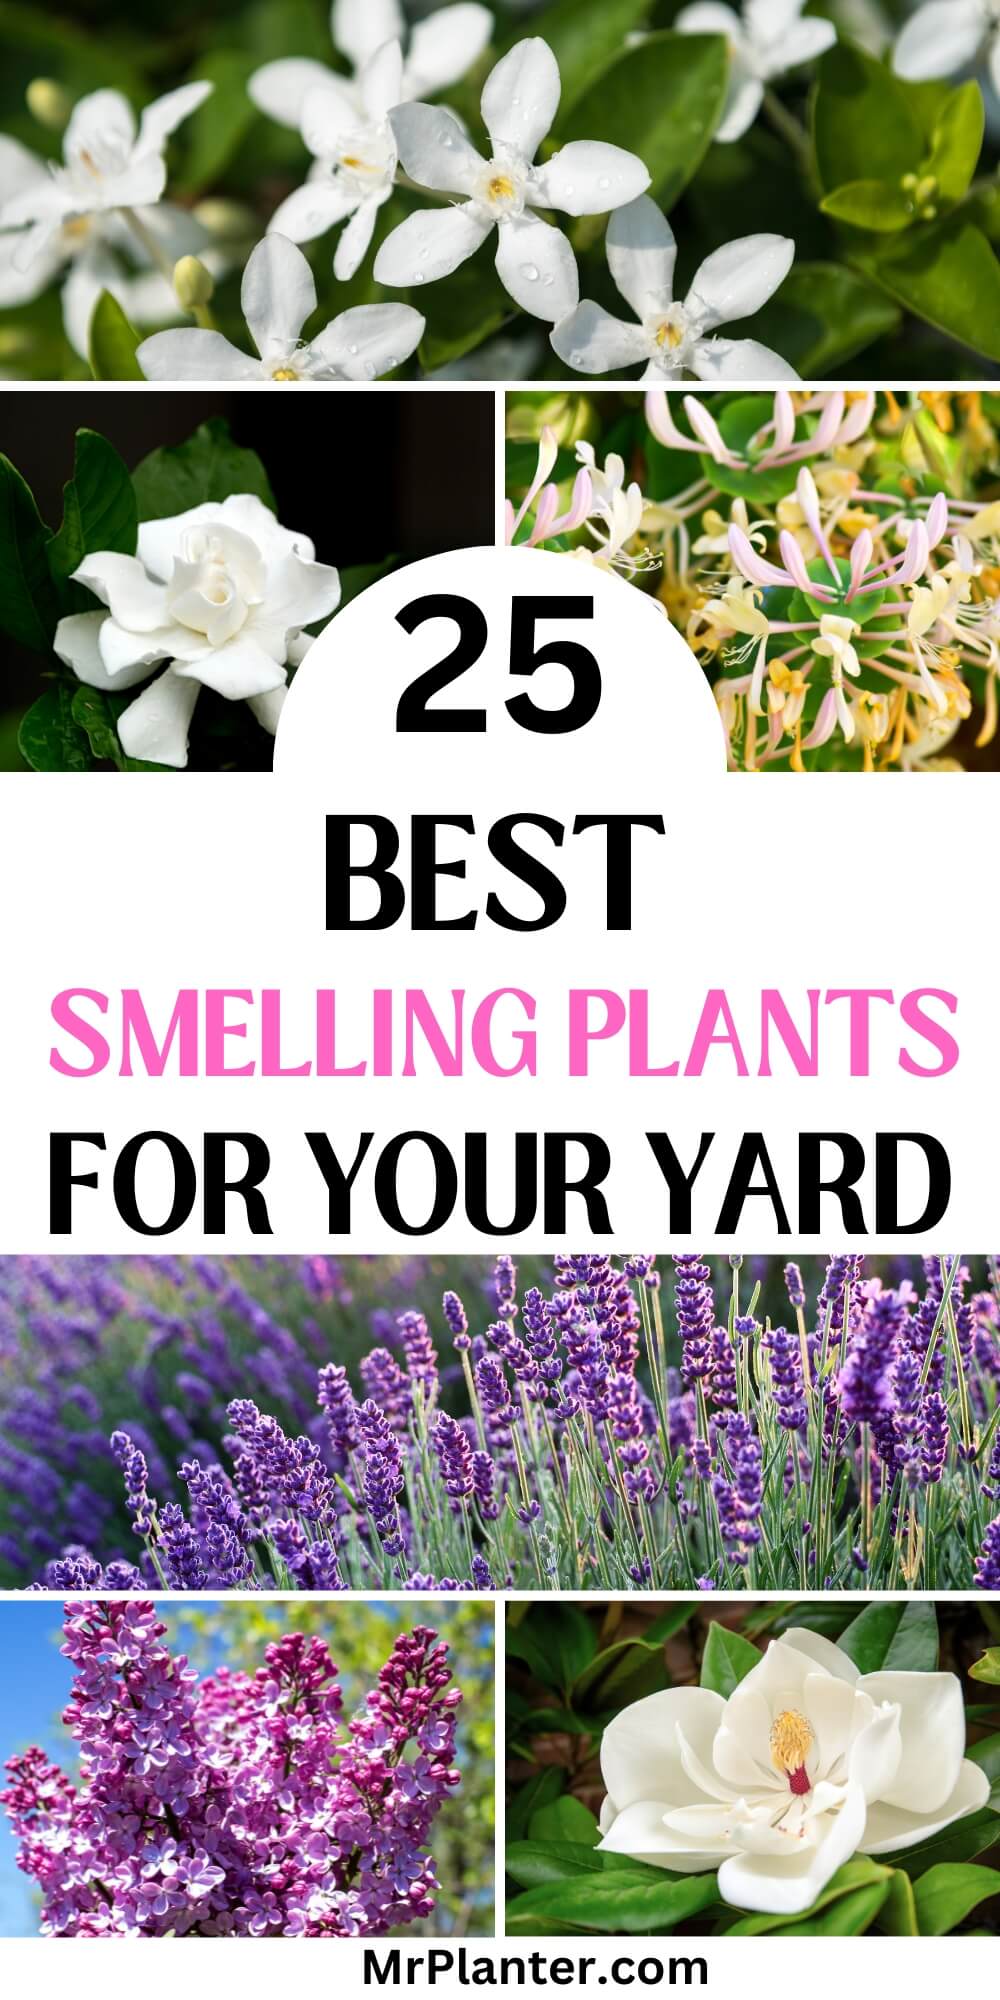 25 Best Smelling Plants for Your Yard